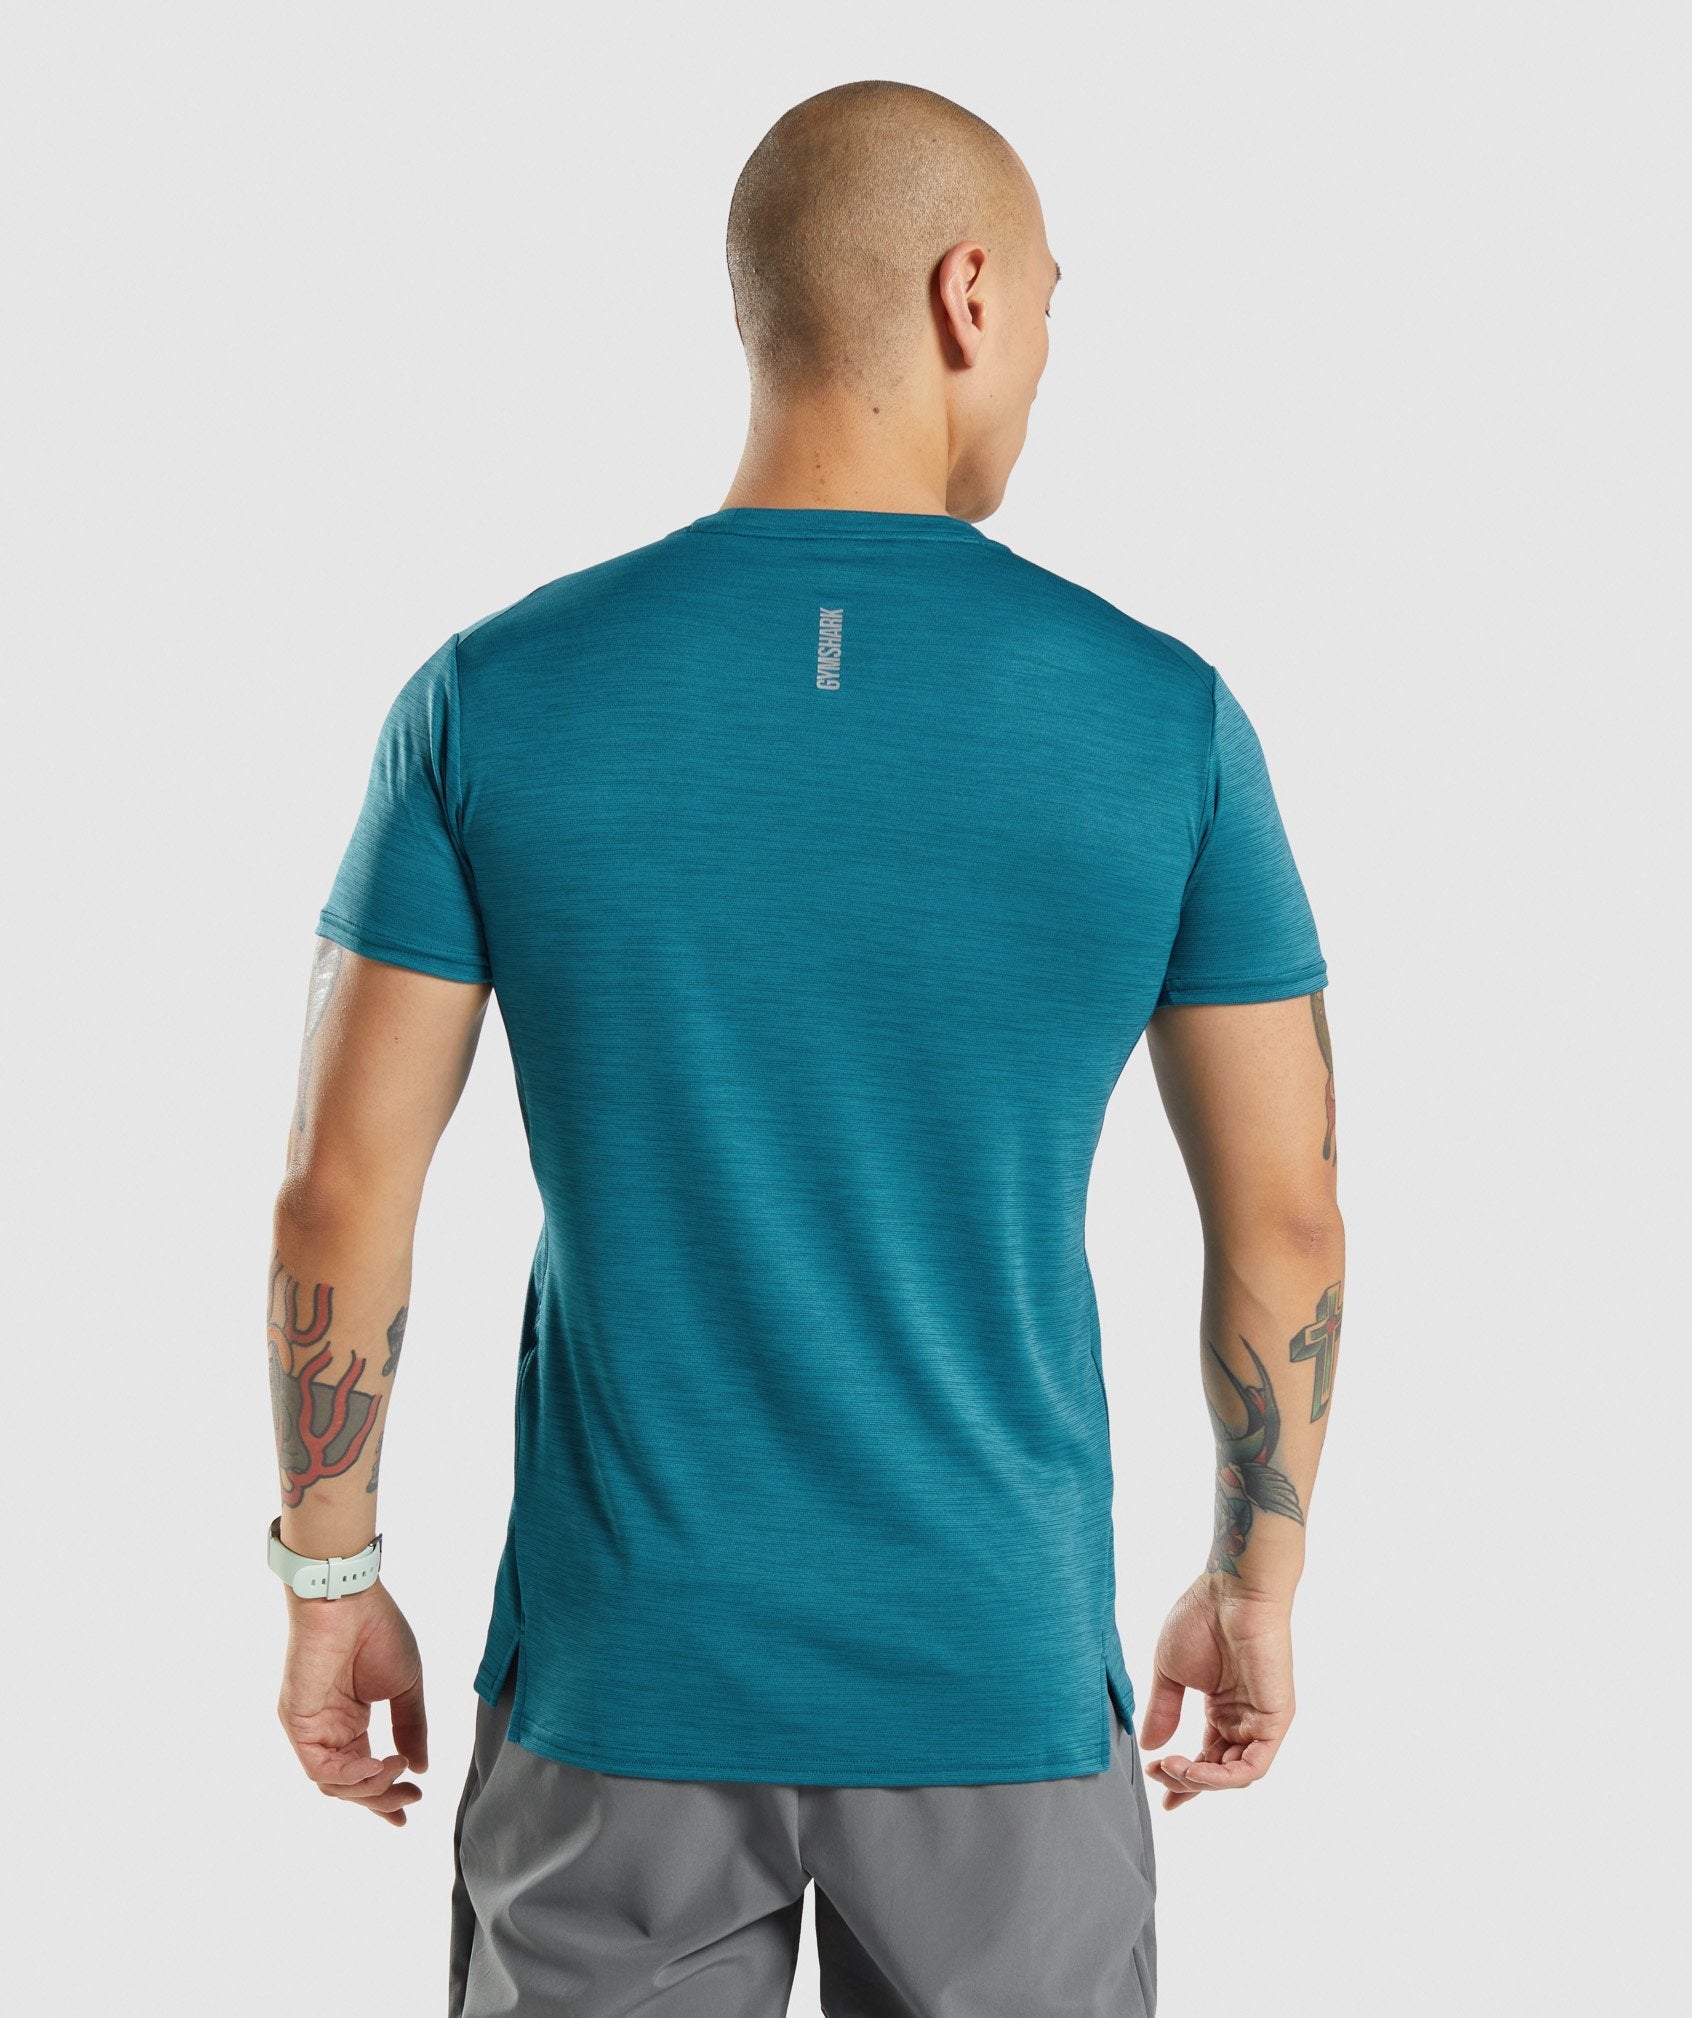 Speed T-Shirt in Teal/Teal Marl - view 2